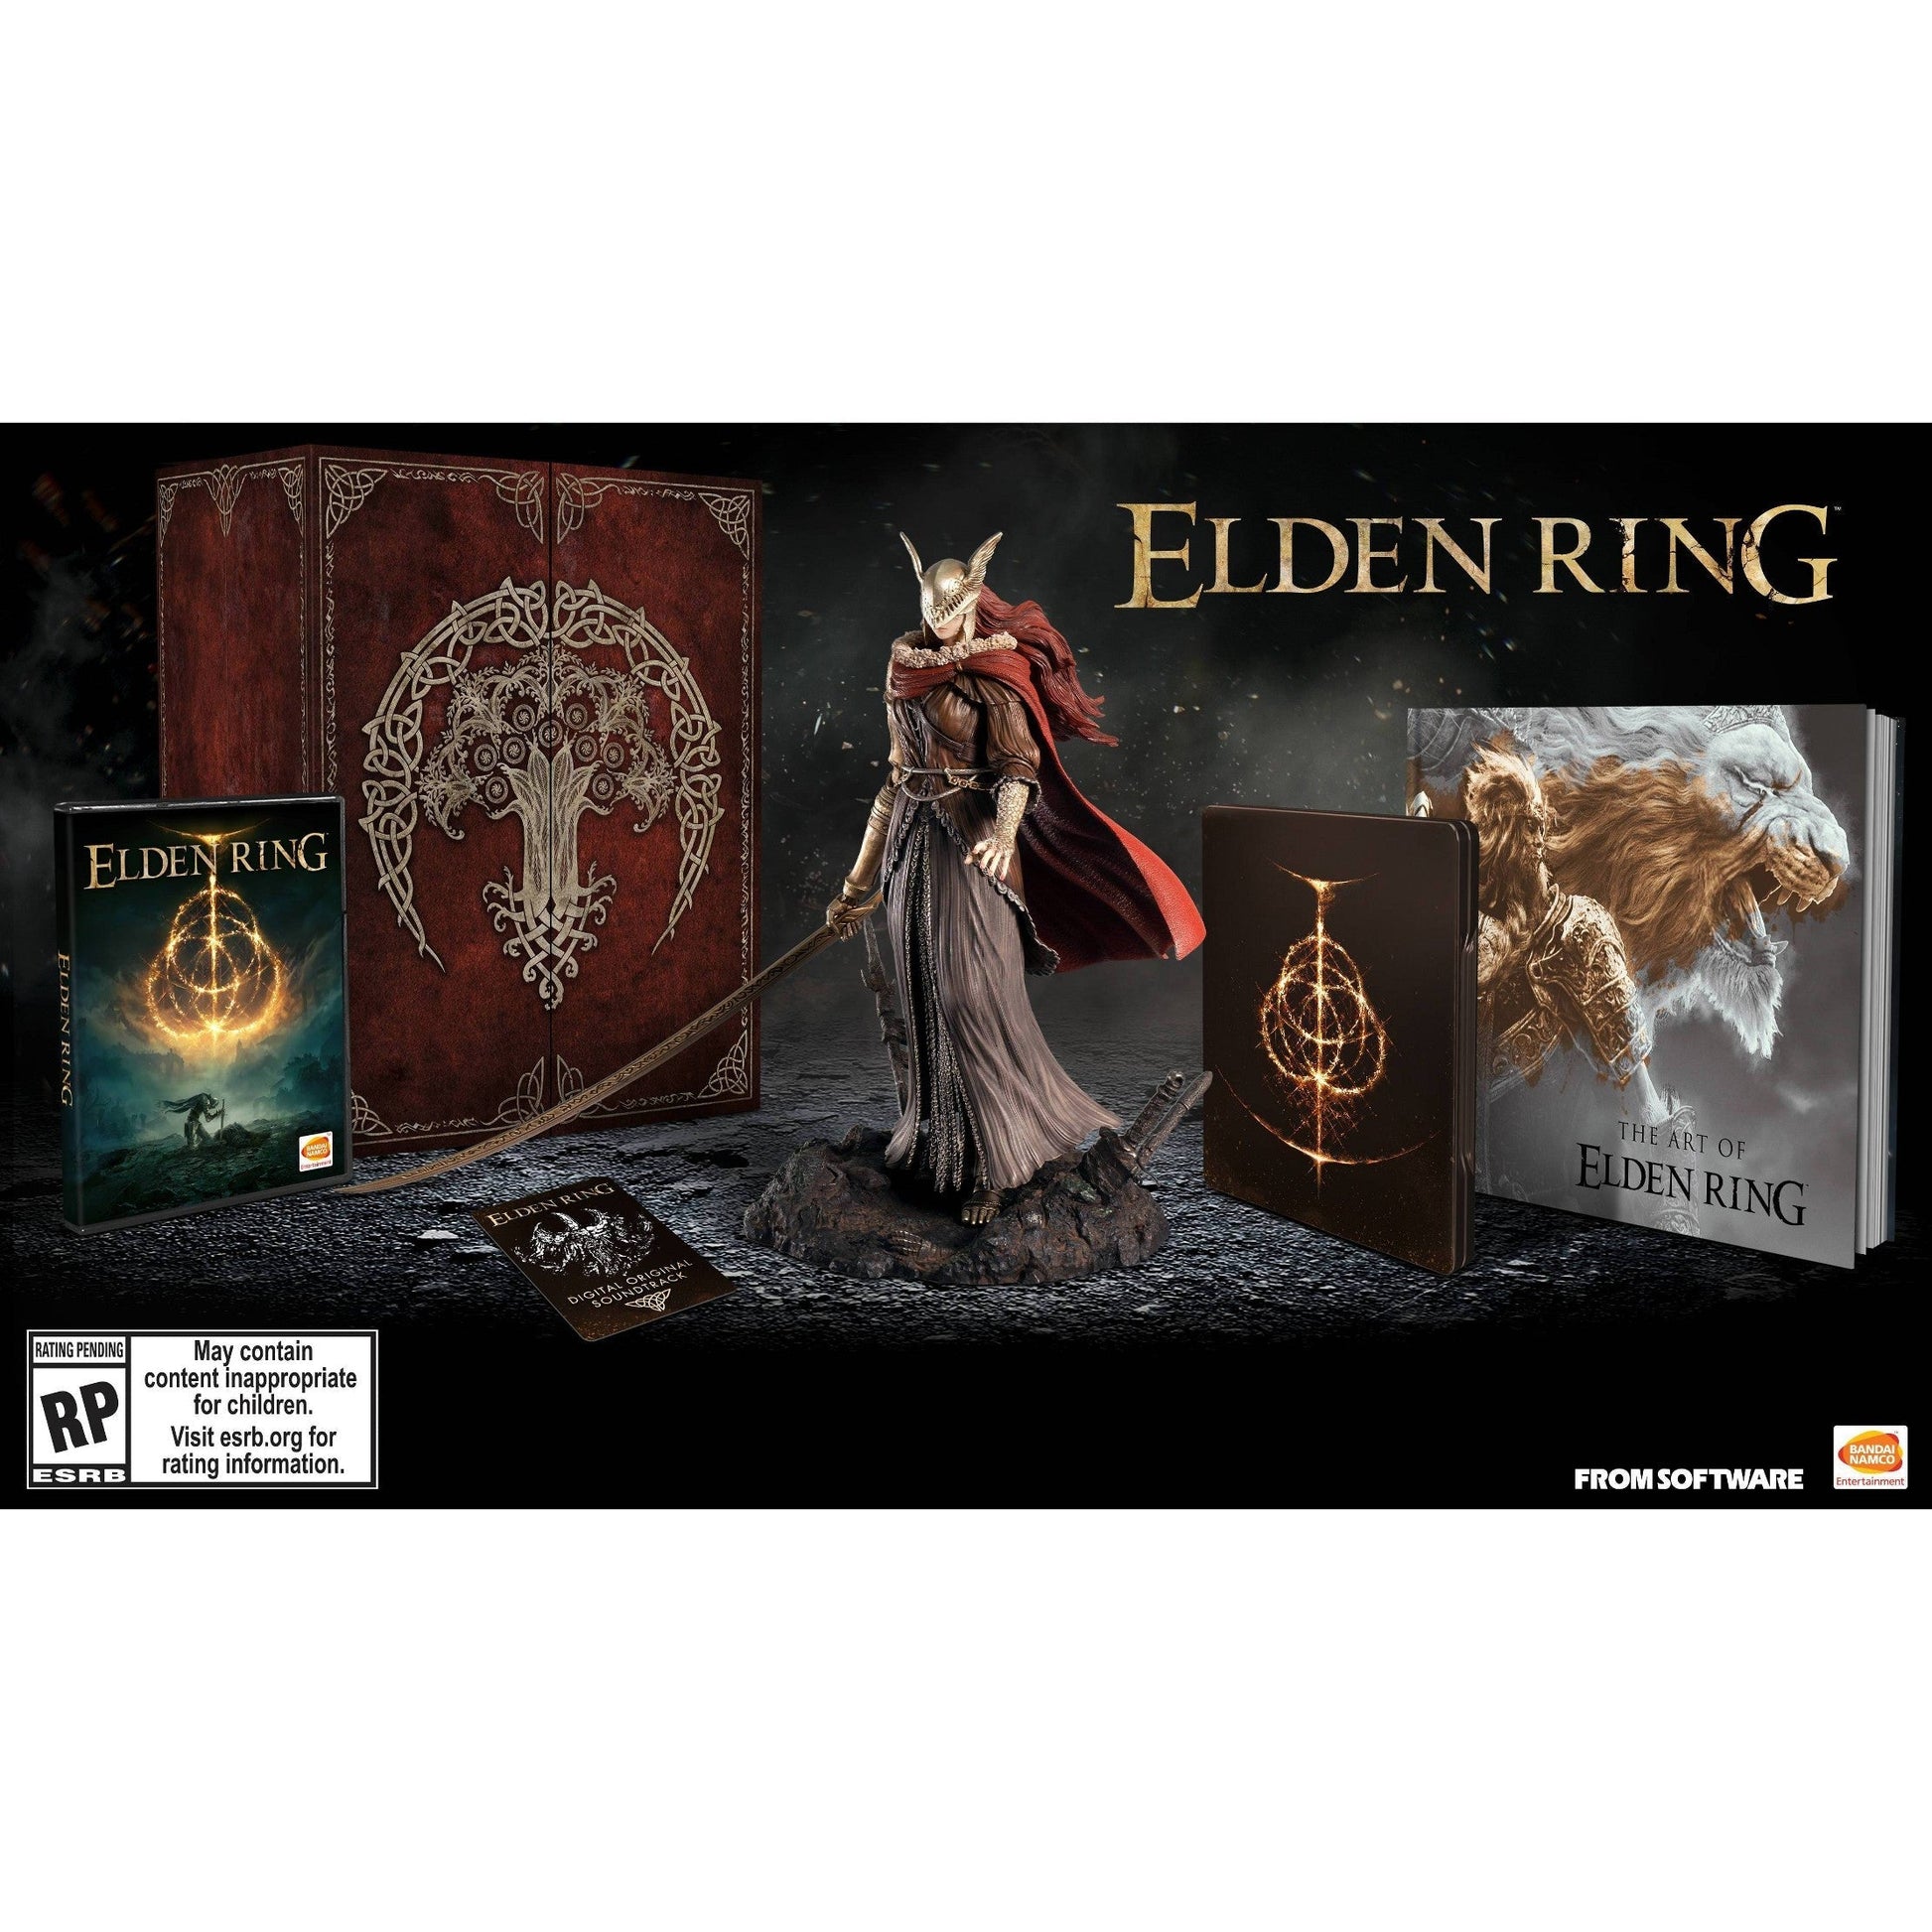 Art book Steelbook Soundtrack Box set from ELDEN RING Collector's Edition